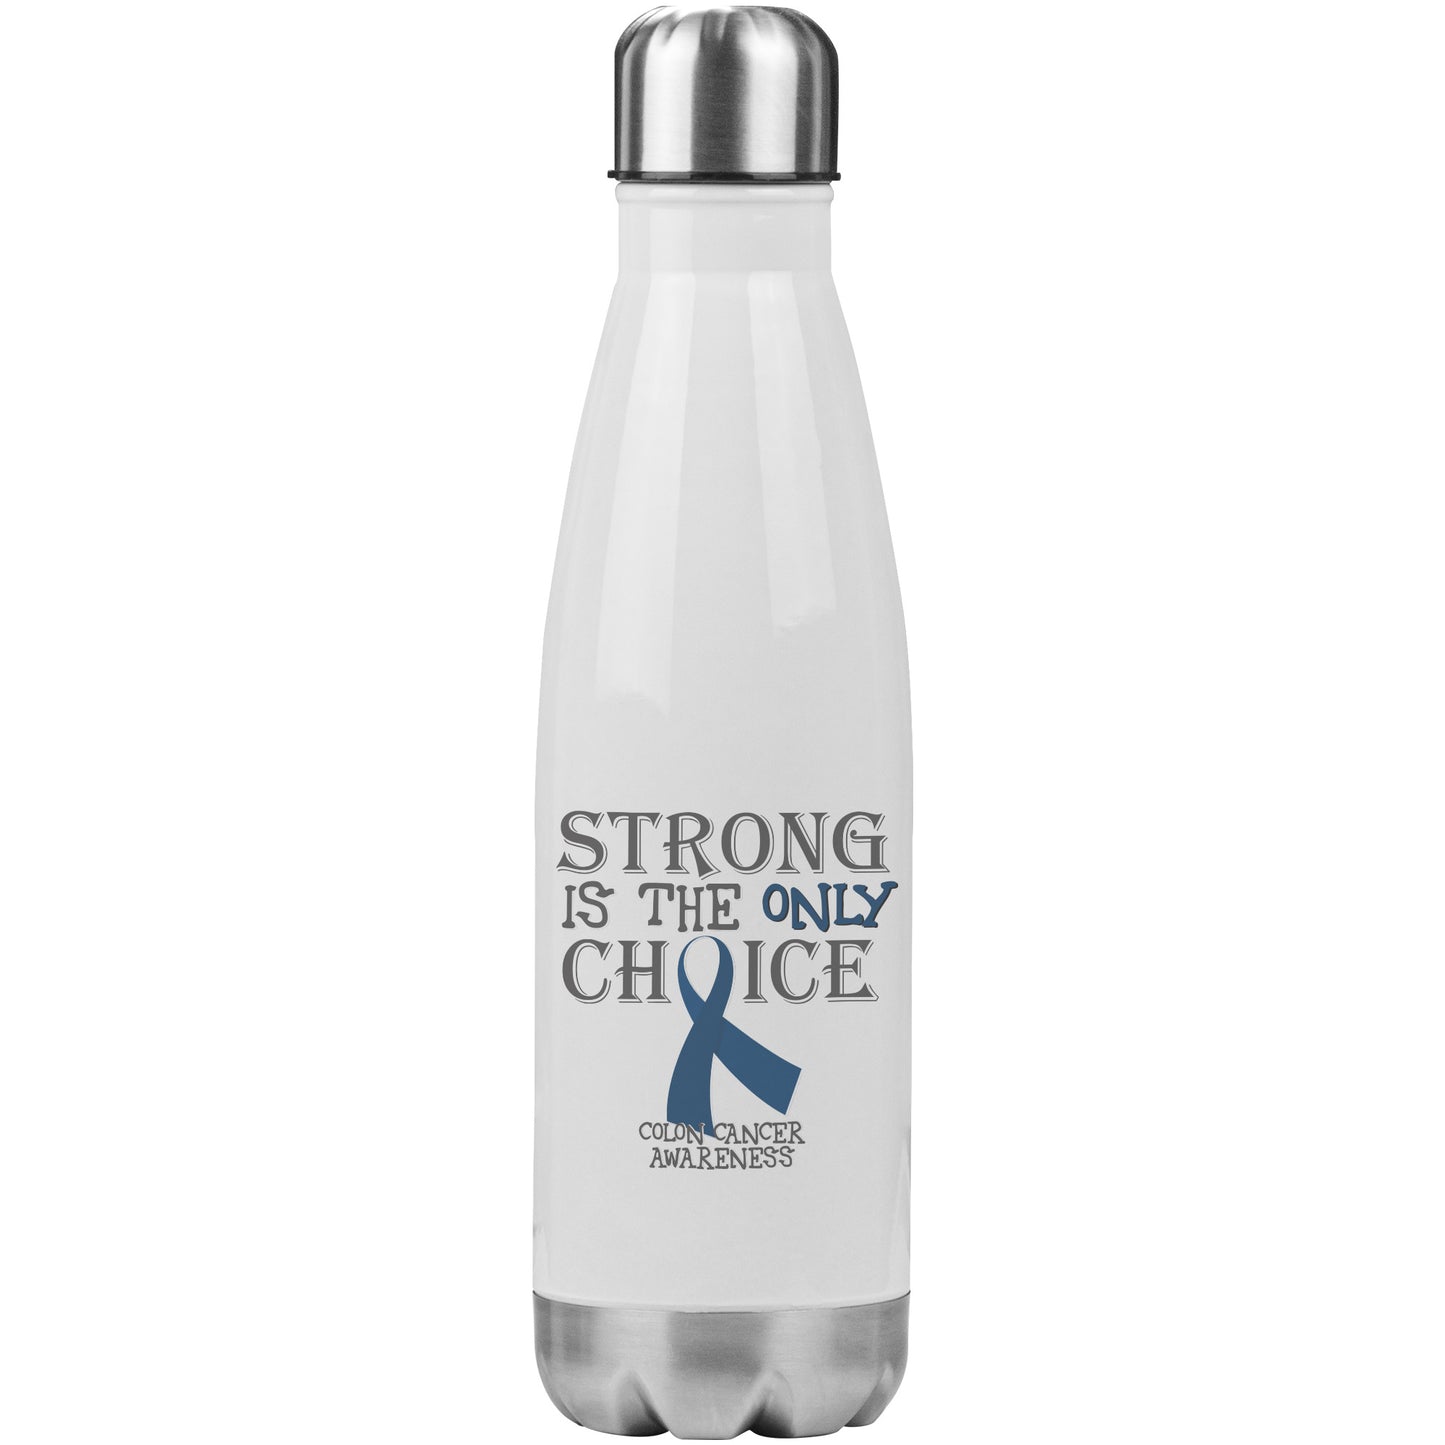 Strong is the Only Choice -Colon Cancer Awareness 20oz Insulated Water Bottle